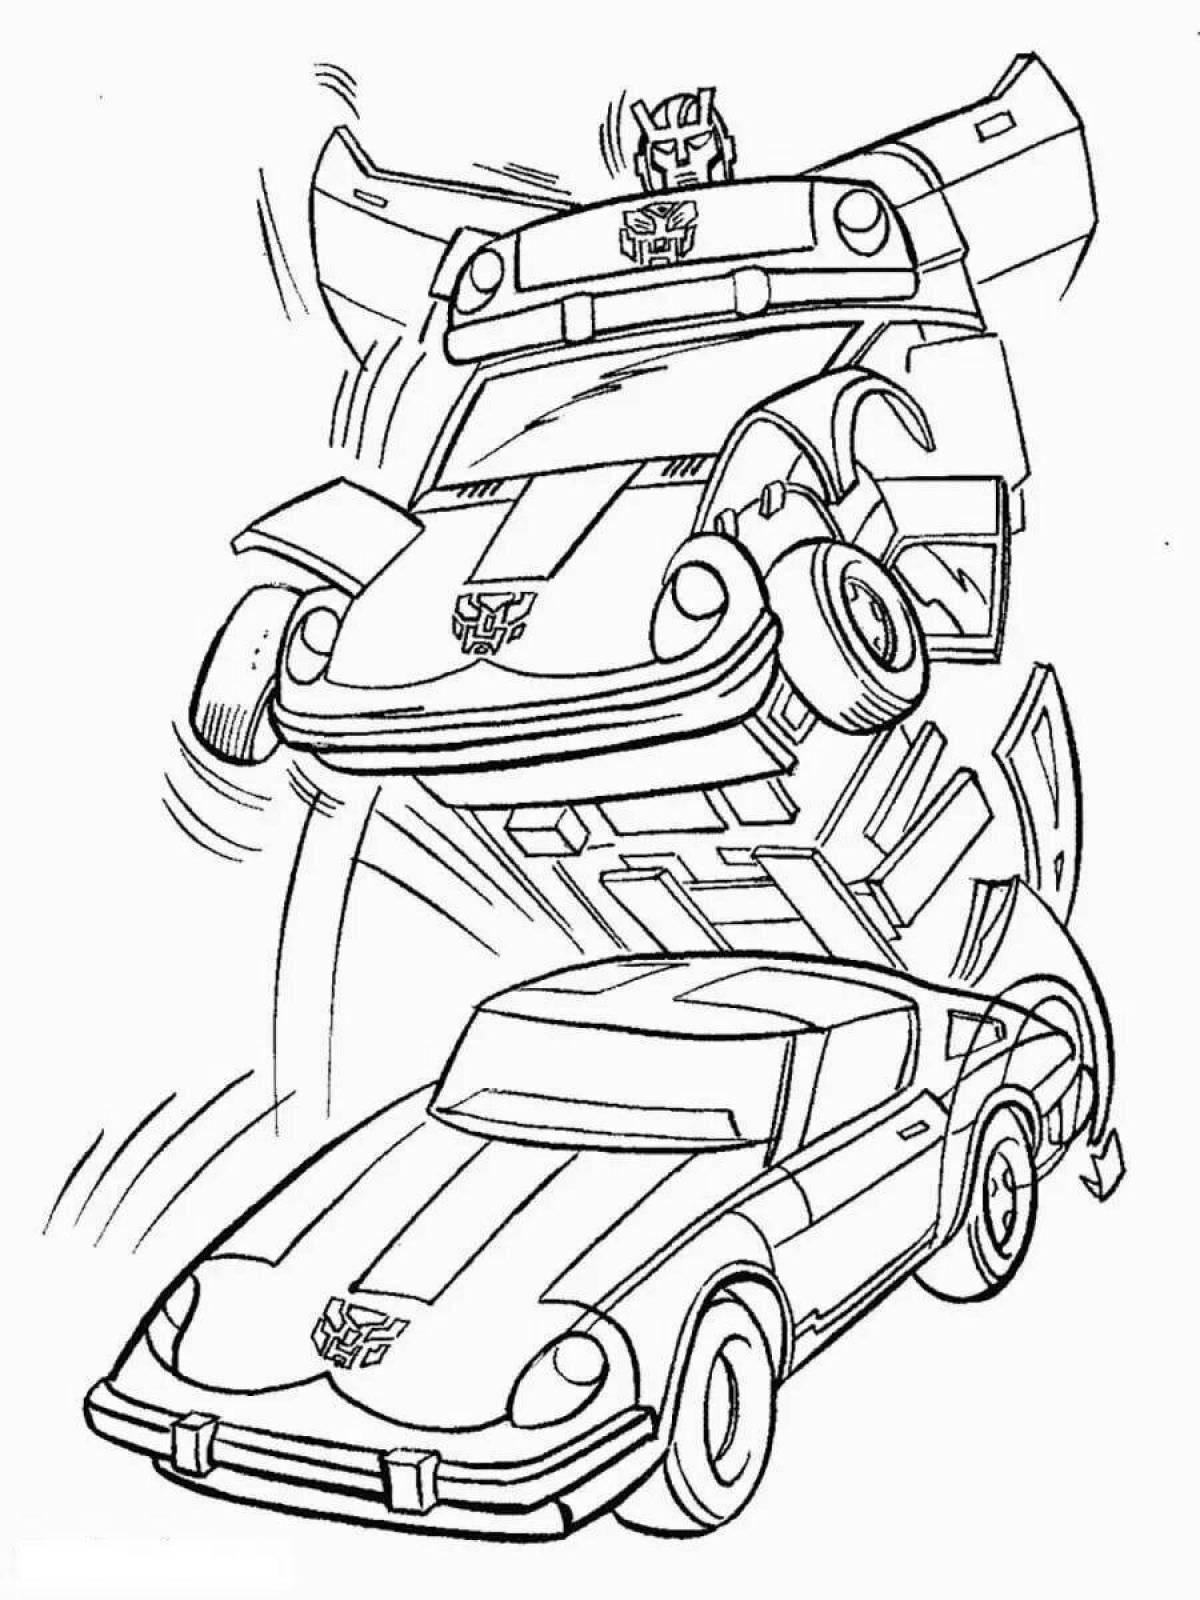 Bright carbot coloring page